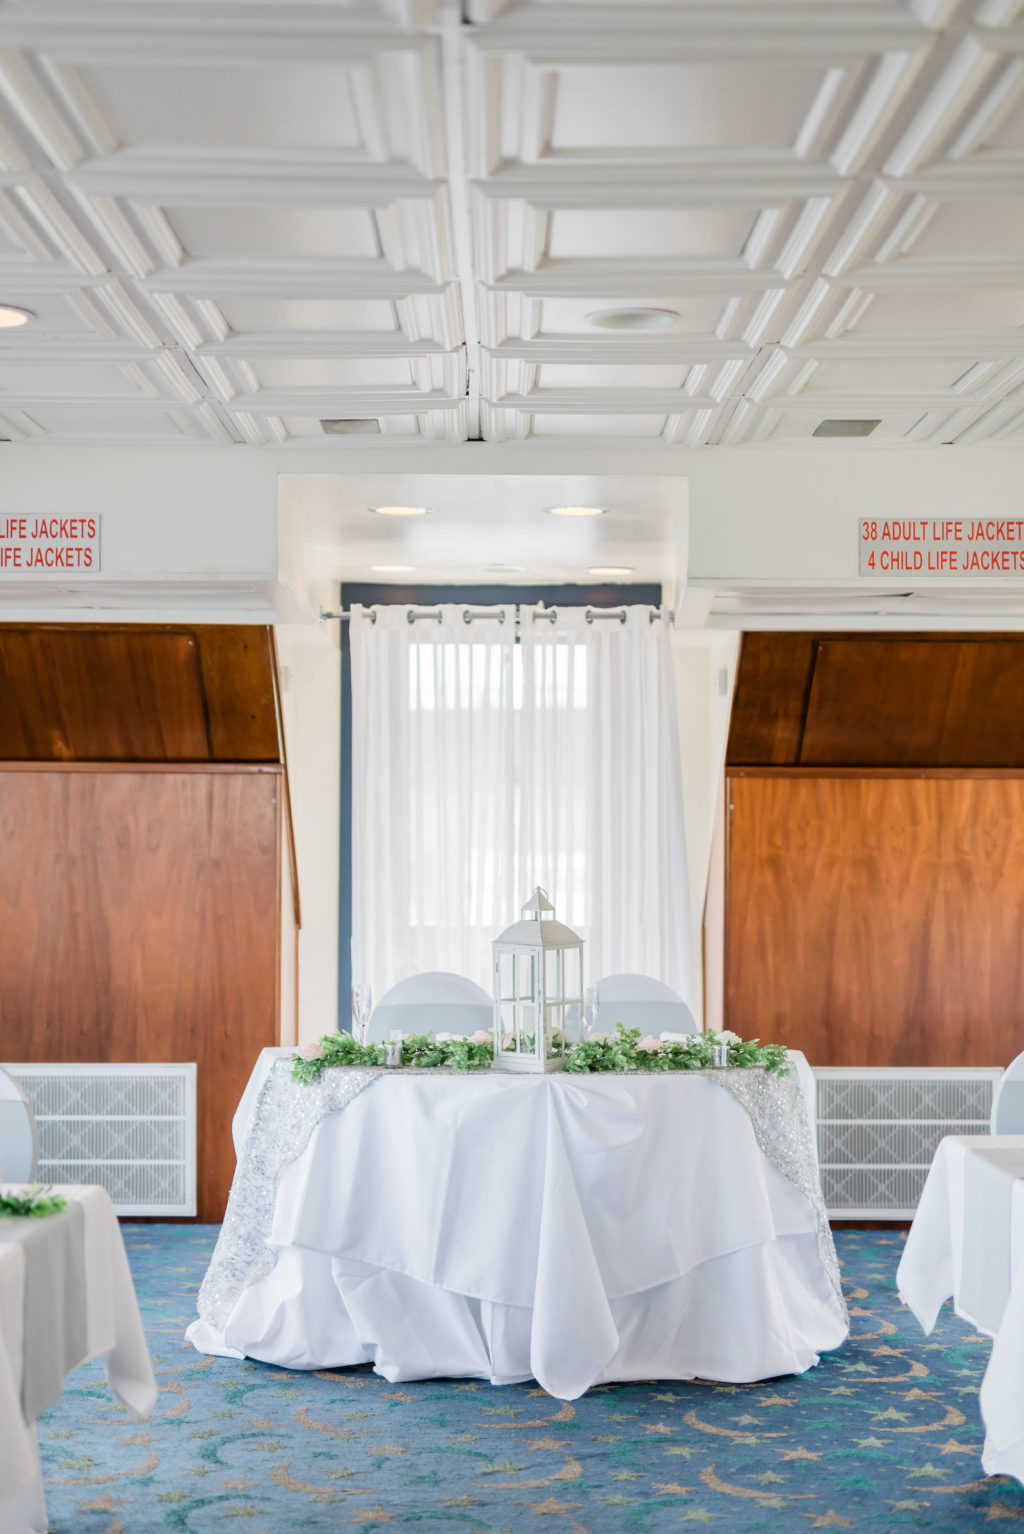 Indoor Wedding Reception at Tampa Venue Yacht Starship | White Sweetheart Table with Greenery Garland Runners and White Lantern Centerpieces | White Wedding Chair Covers with Silver Grey Sash Bow by Kate Ryan Event Rentals